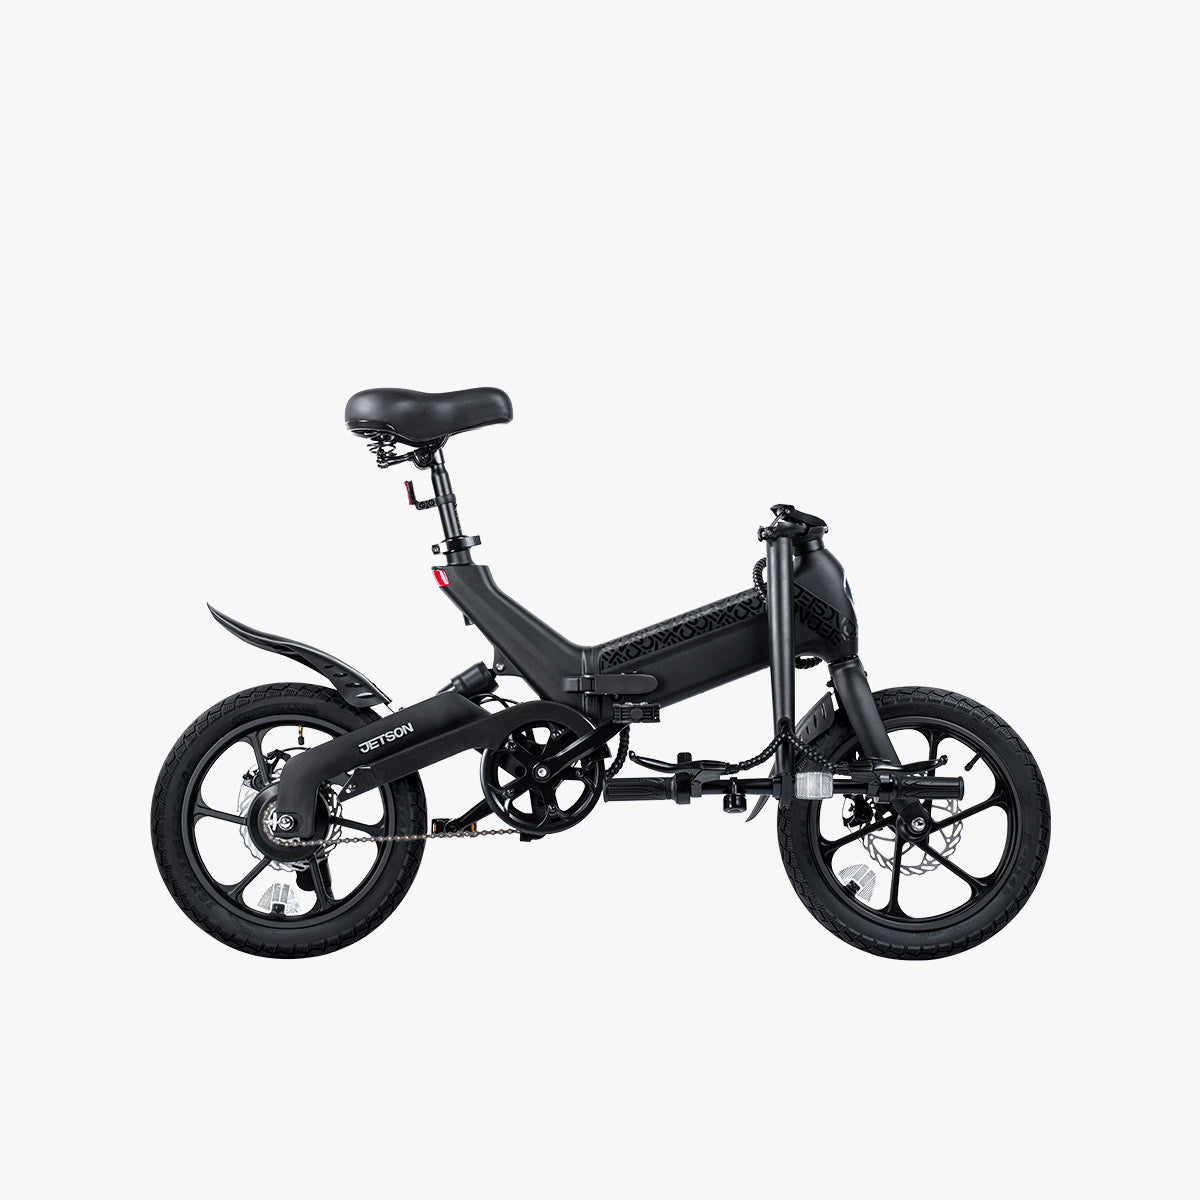 Haze electric bike facing right with front folded down